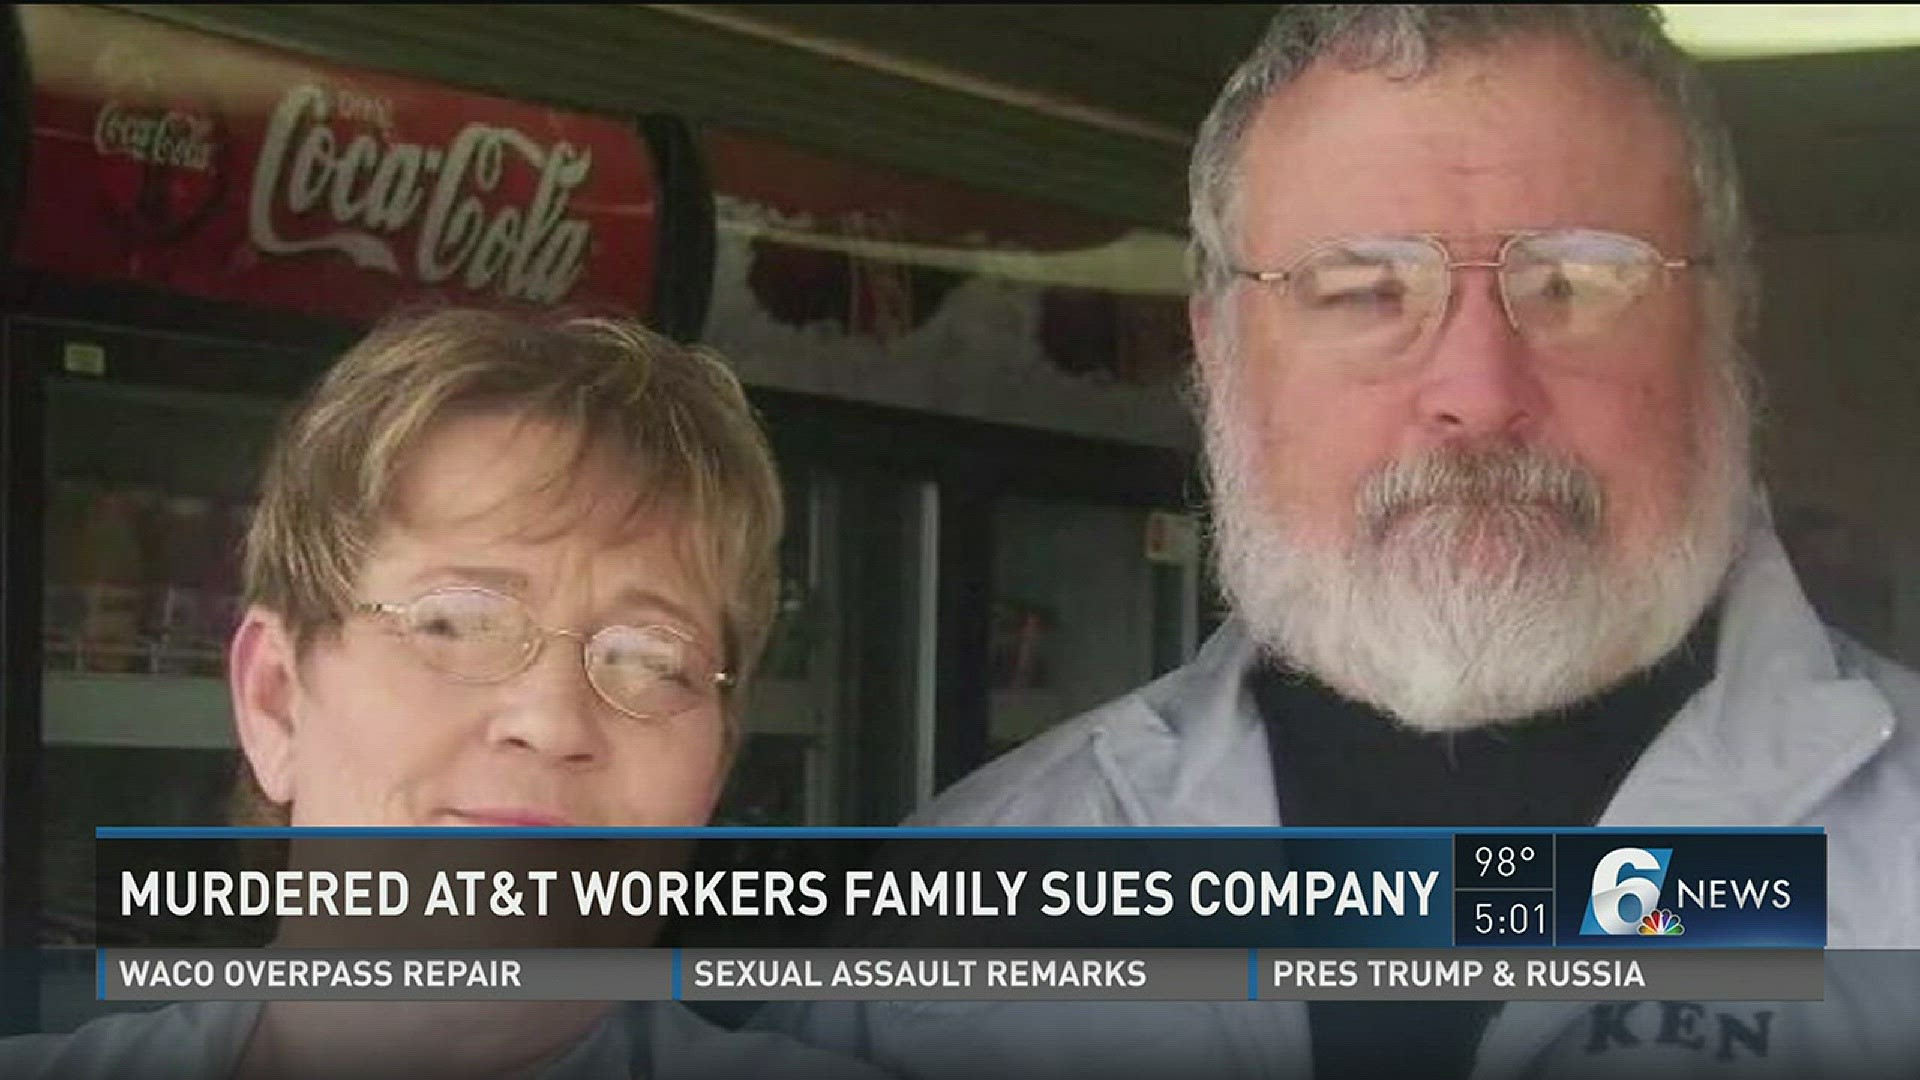 The family of the 61-year-old Waco AT&T worker brutally murdered is suing the company.